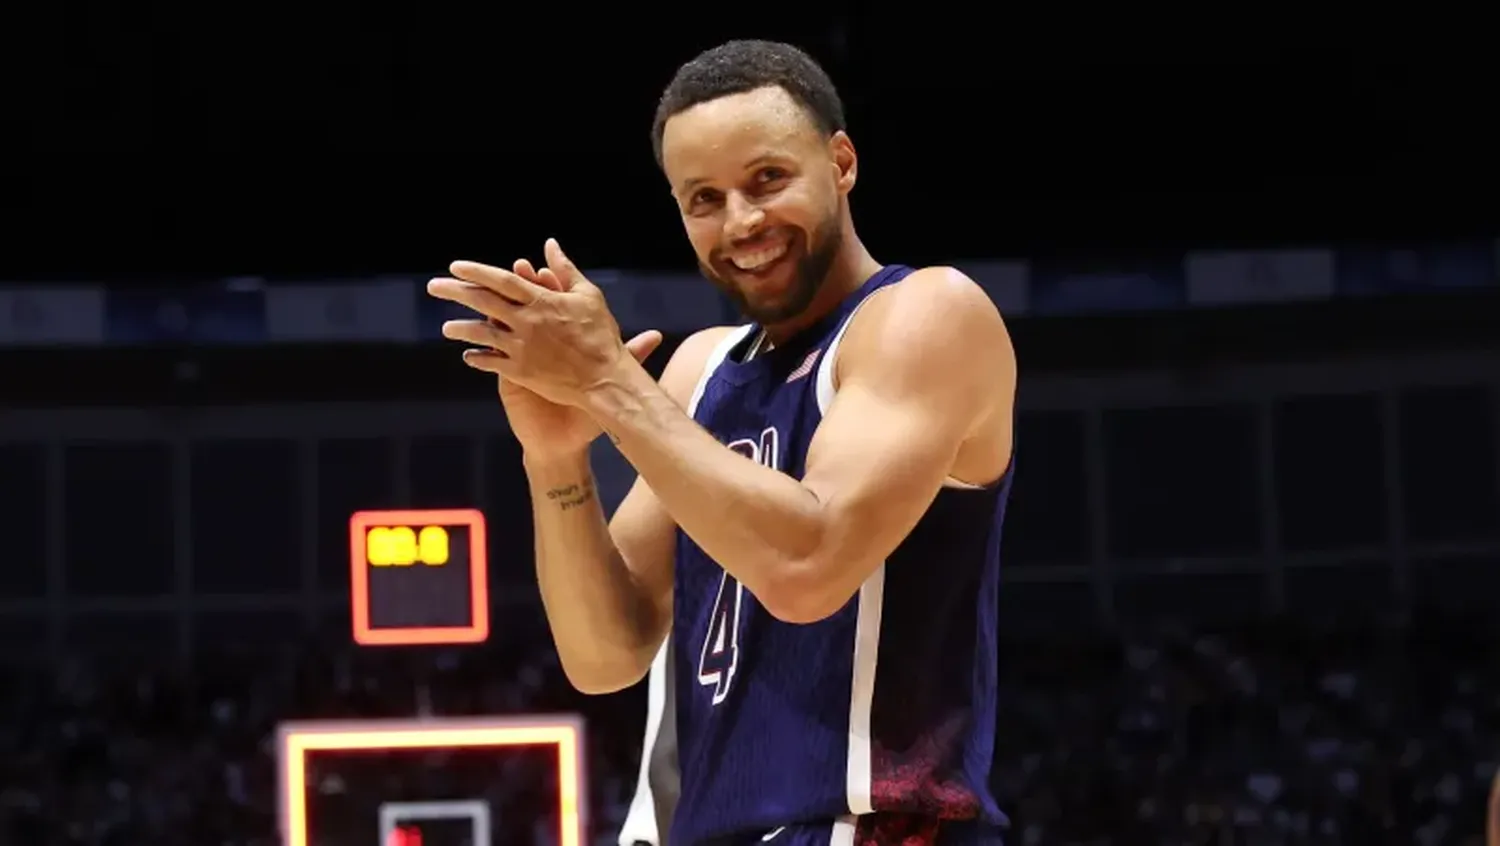 Stephen Curry's Olympic Dream: Aiming for Gold in Paris 2024